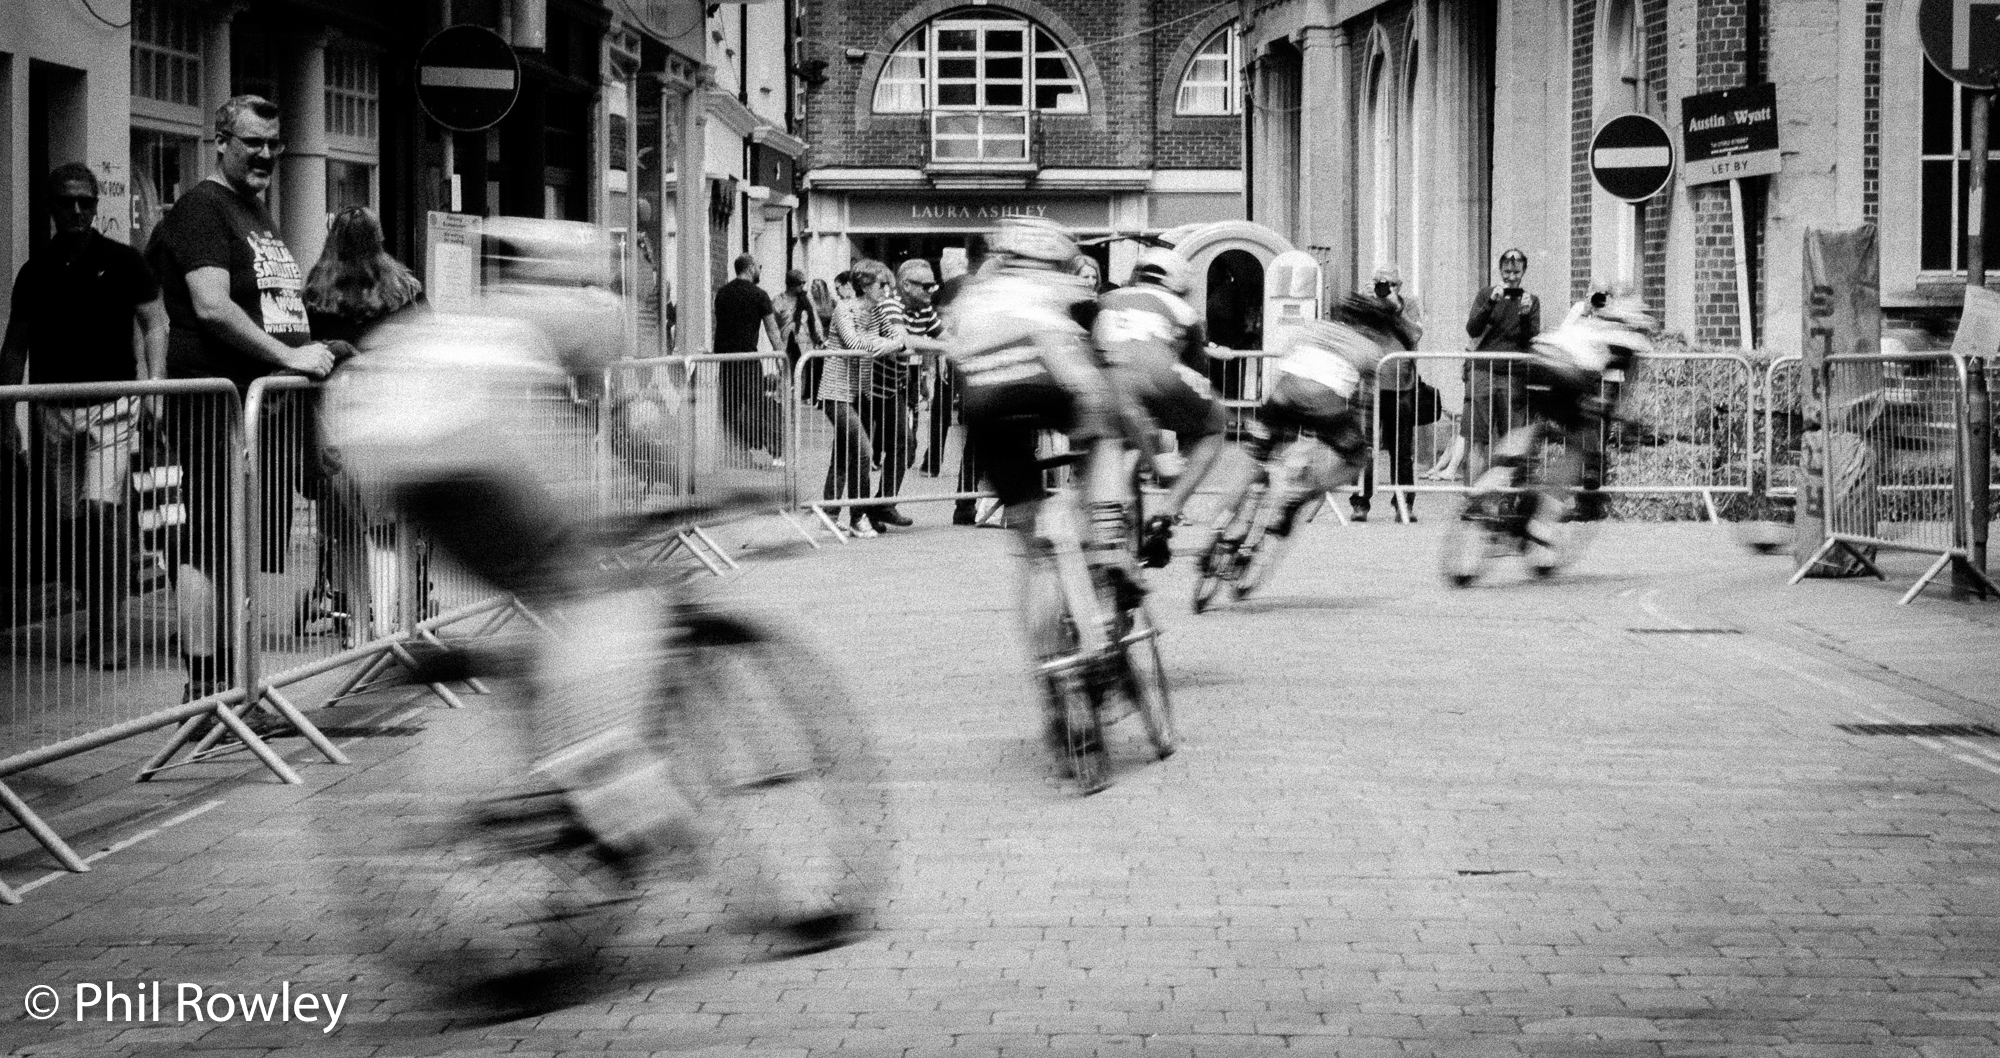 Cyclists competing in the Winchester Criterium, Hampshire, UK, 2018